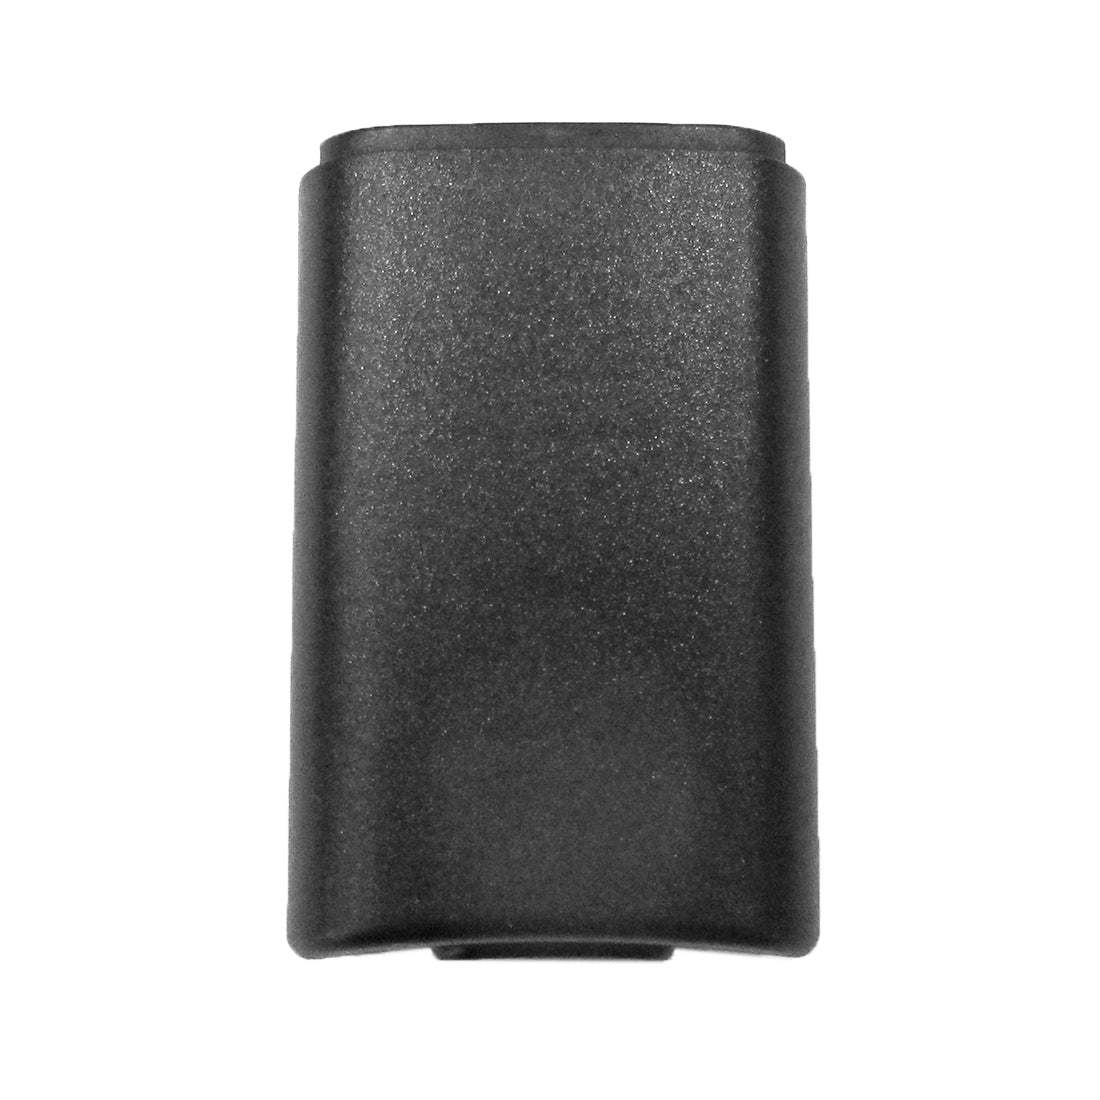 Battery Cover For XBOX 360